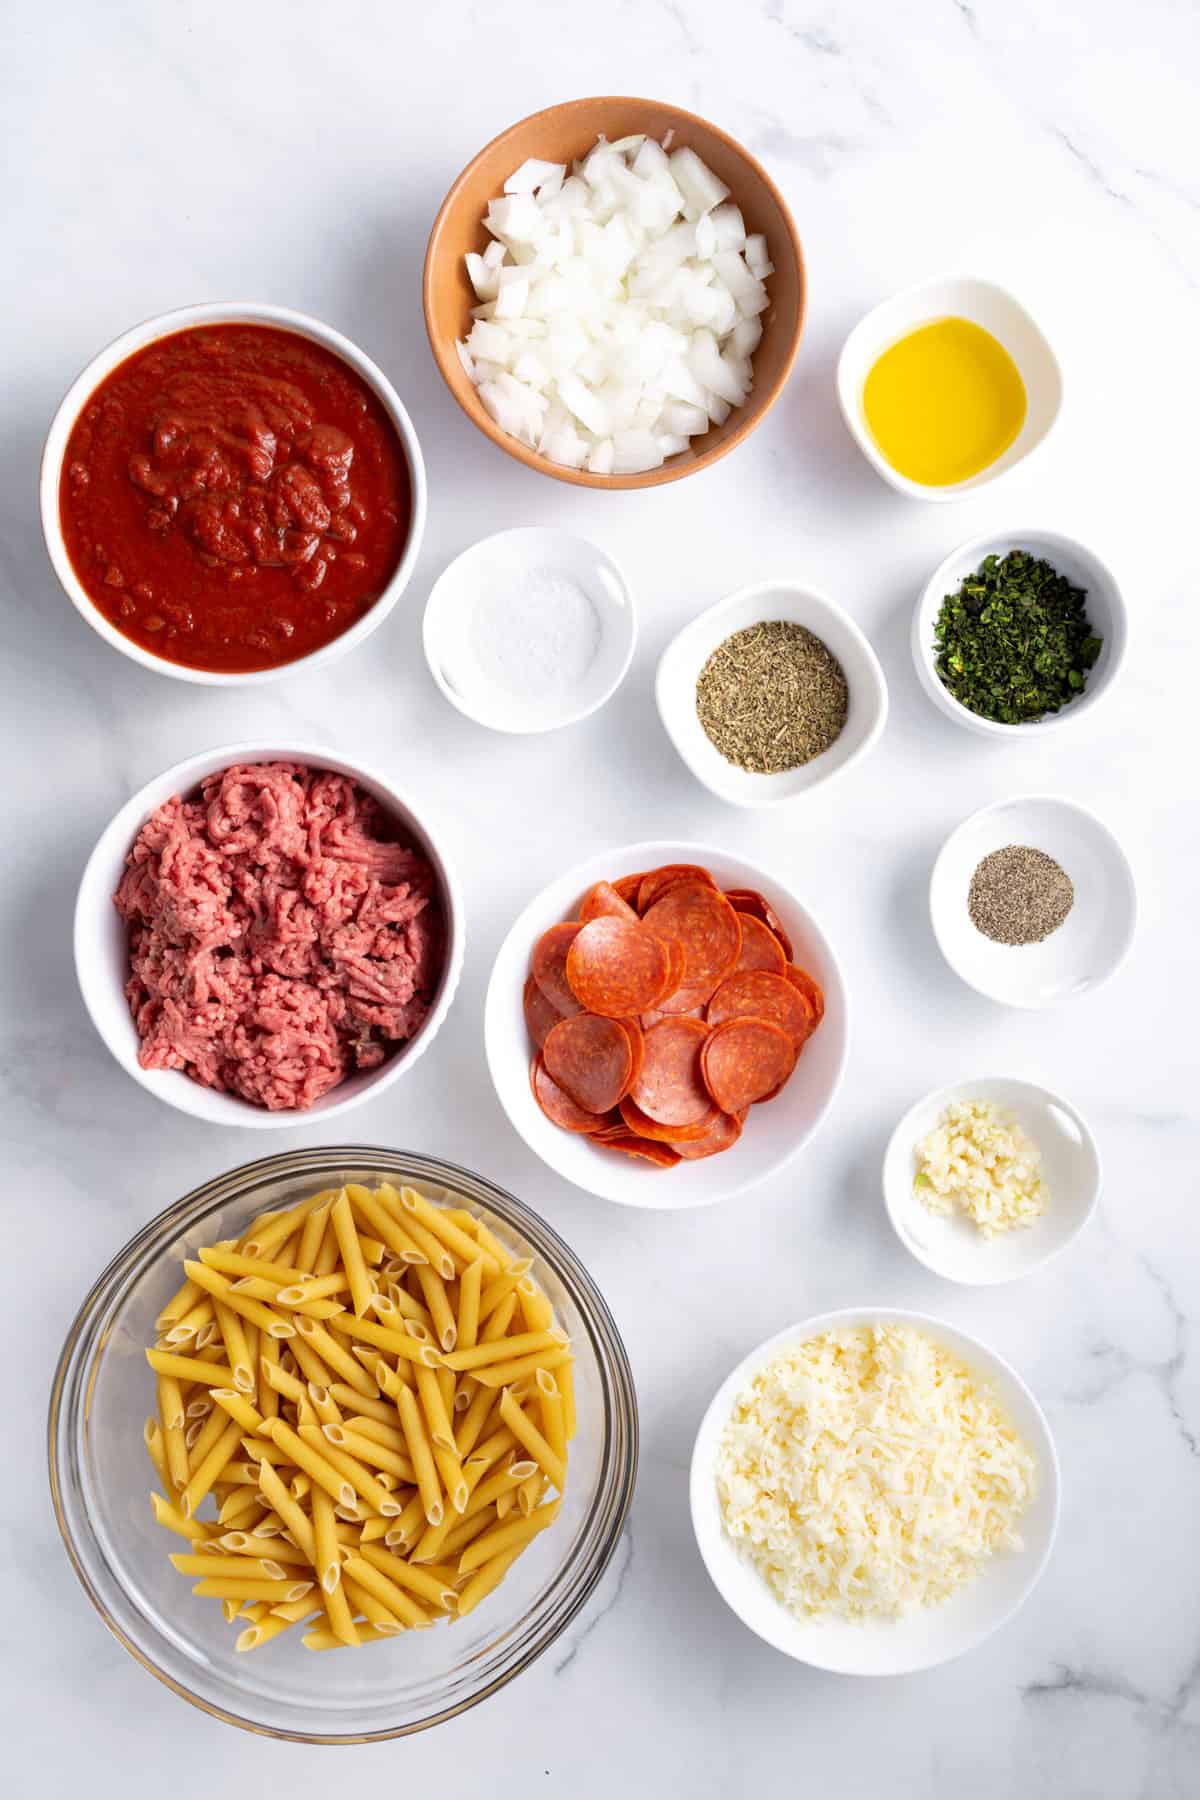 ingredients to make pizza casserole in a crockpot